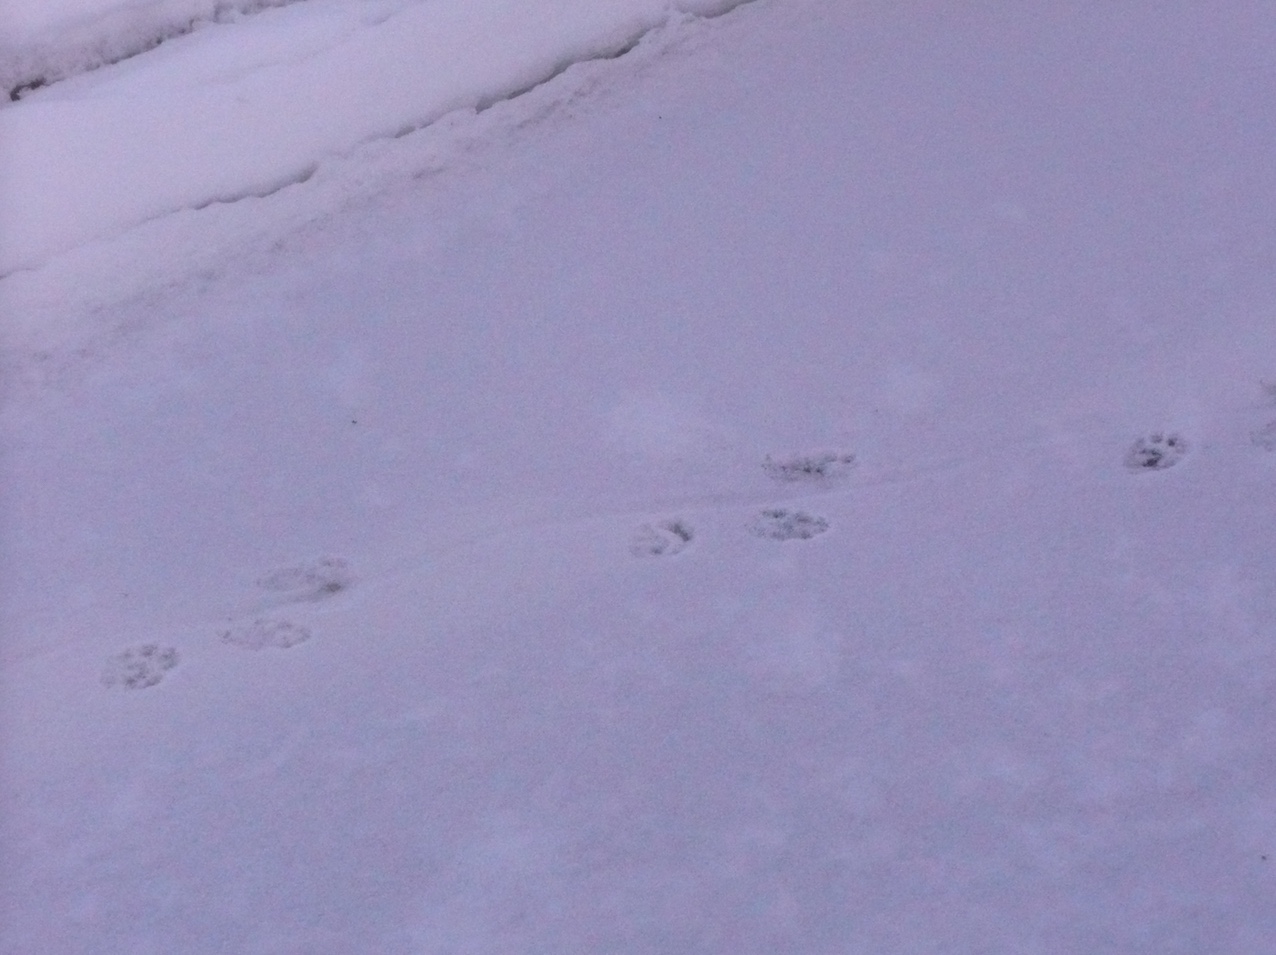 River otter tracks in snow. Note the line caused by the otter's tail dragging on the snow.